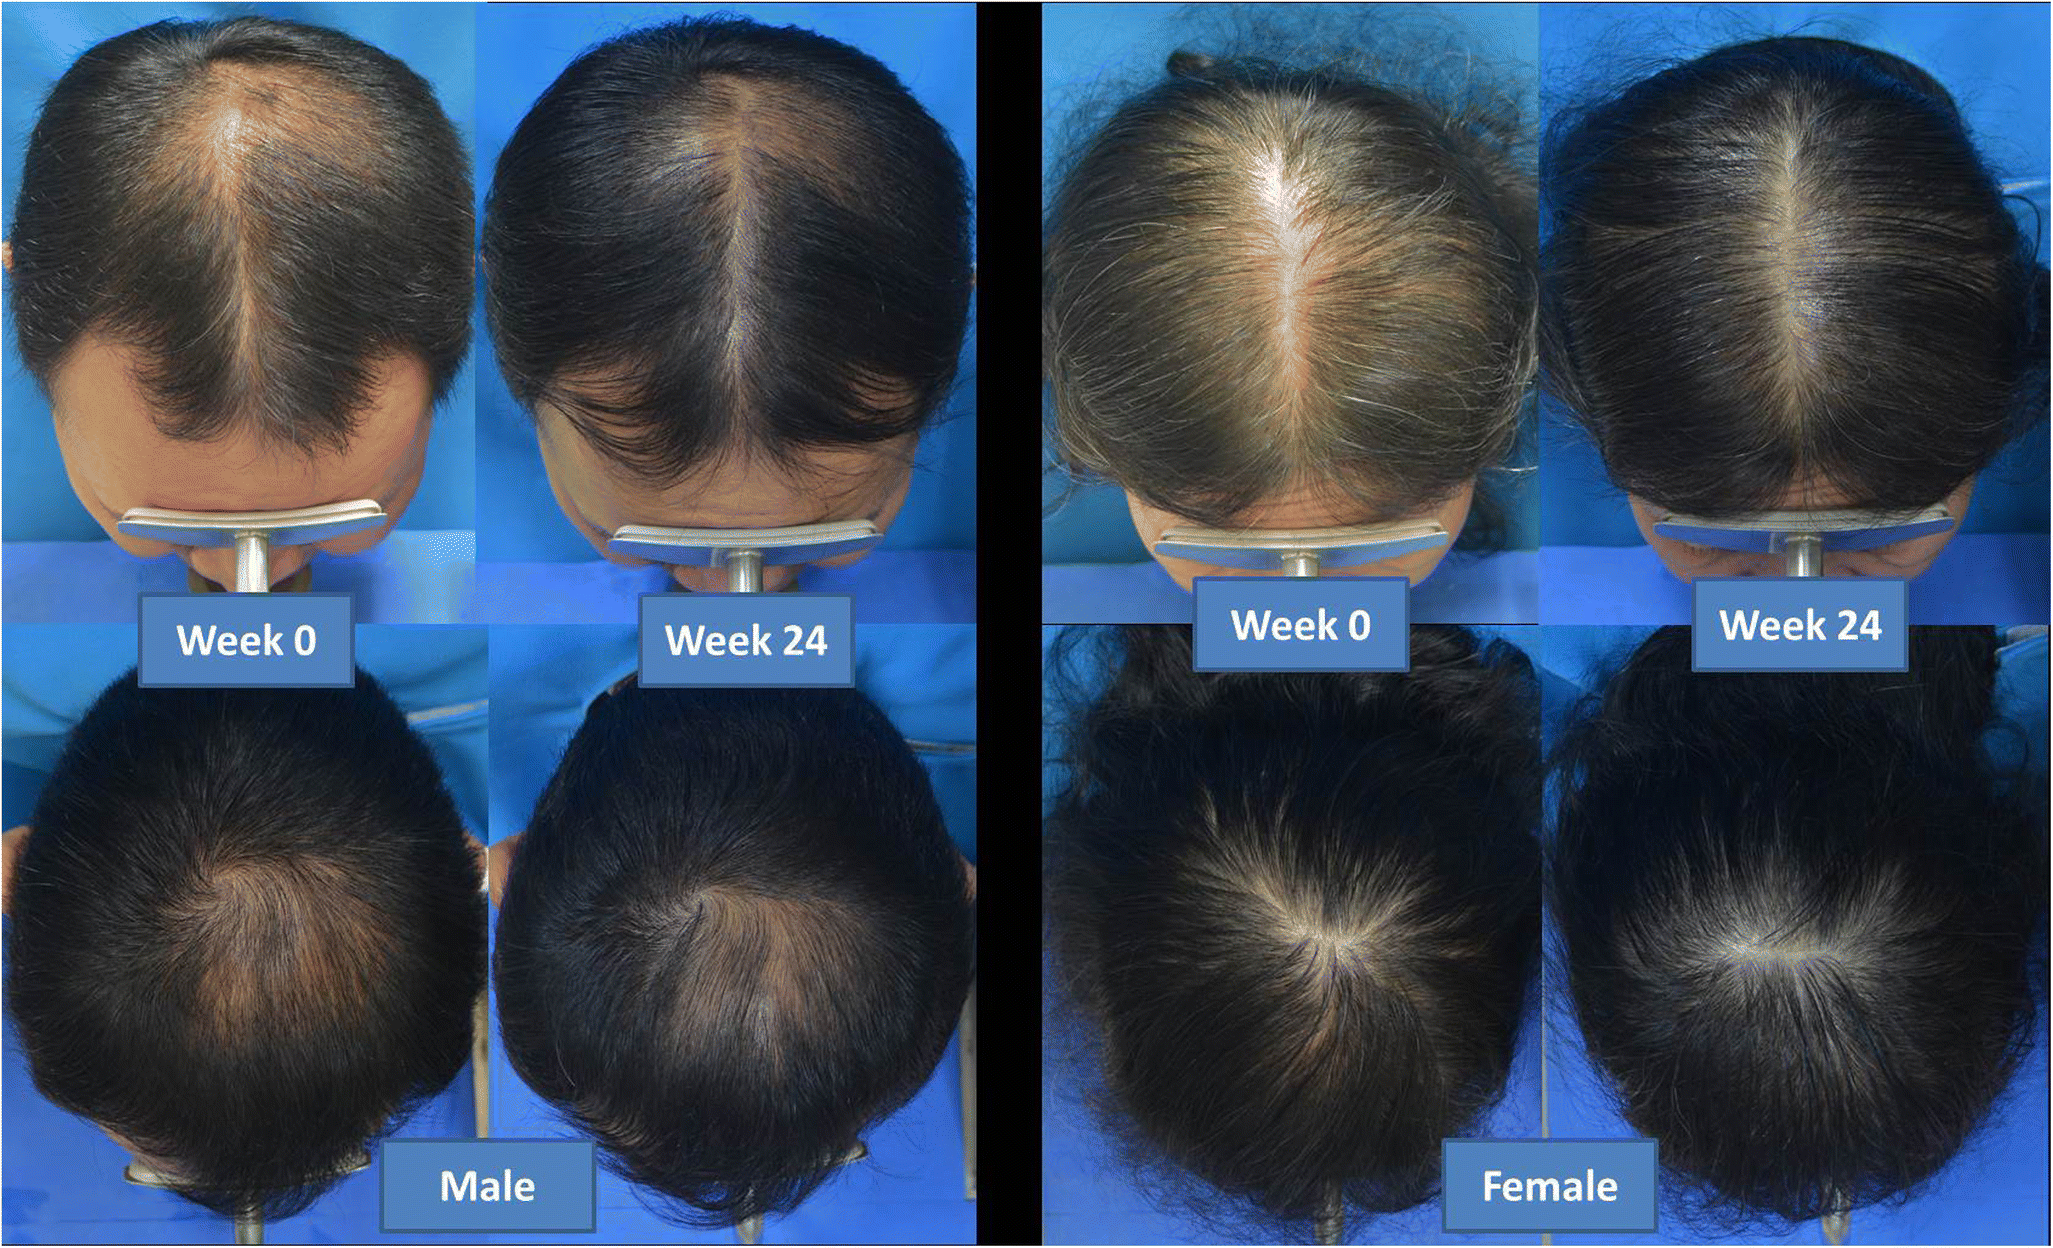 Low-level laser therapy for the treatment of androgenetic alopecia in Thai men and women: a 24-week, randomized, double-blind, sham device-controlled trial before and after